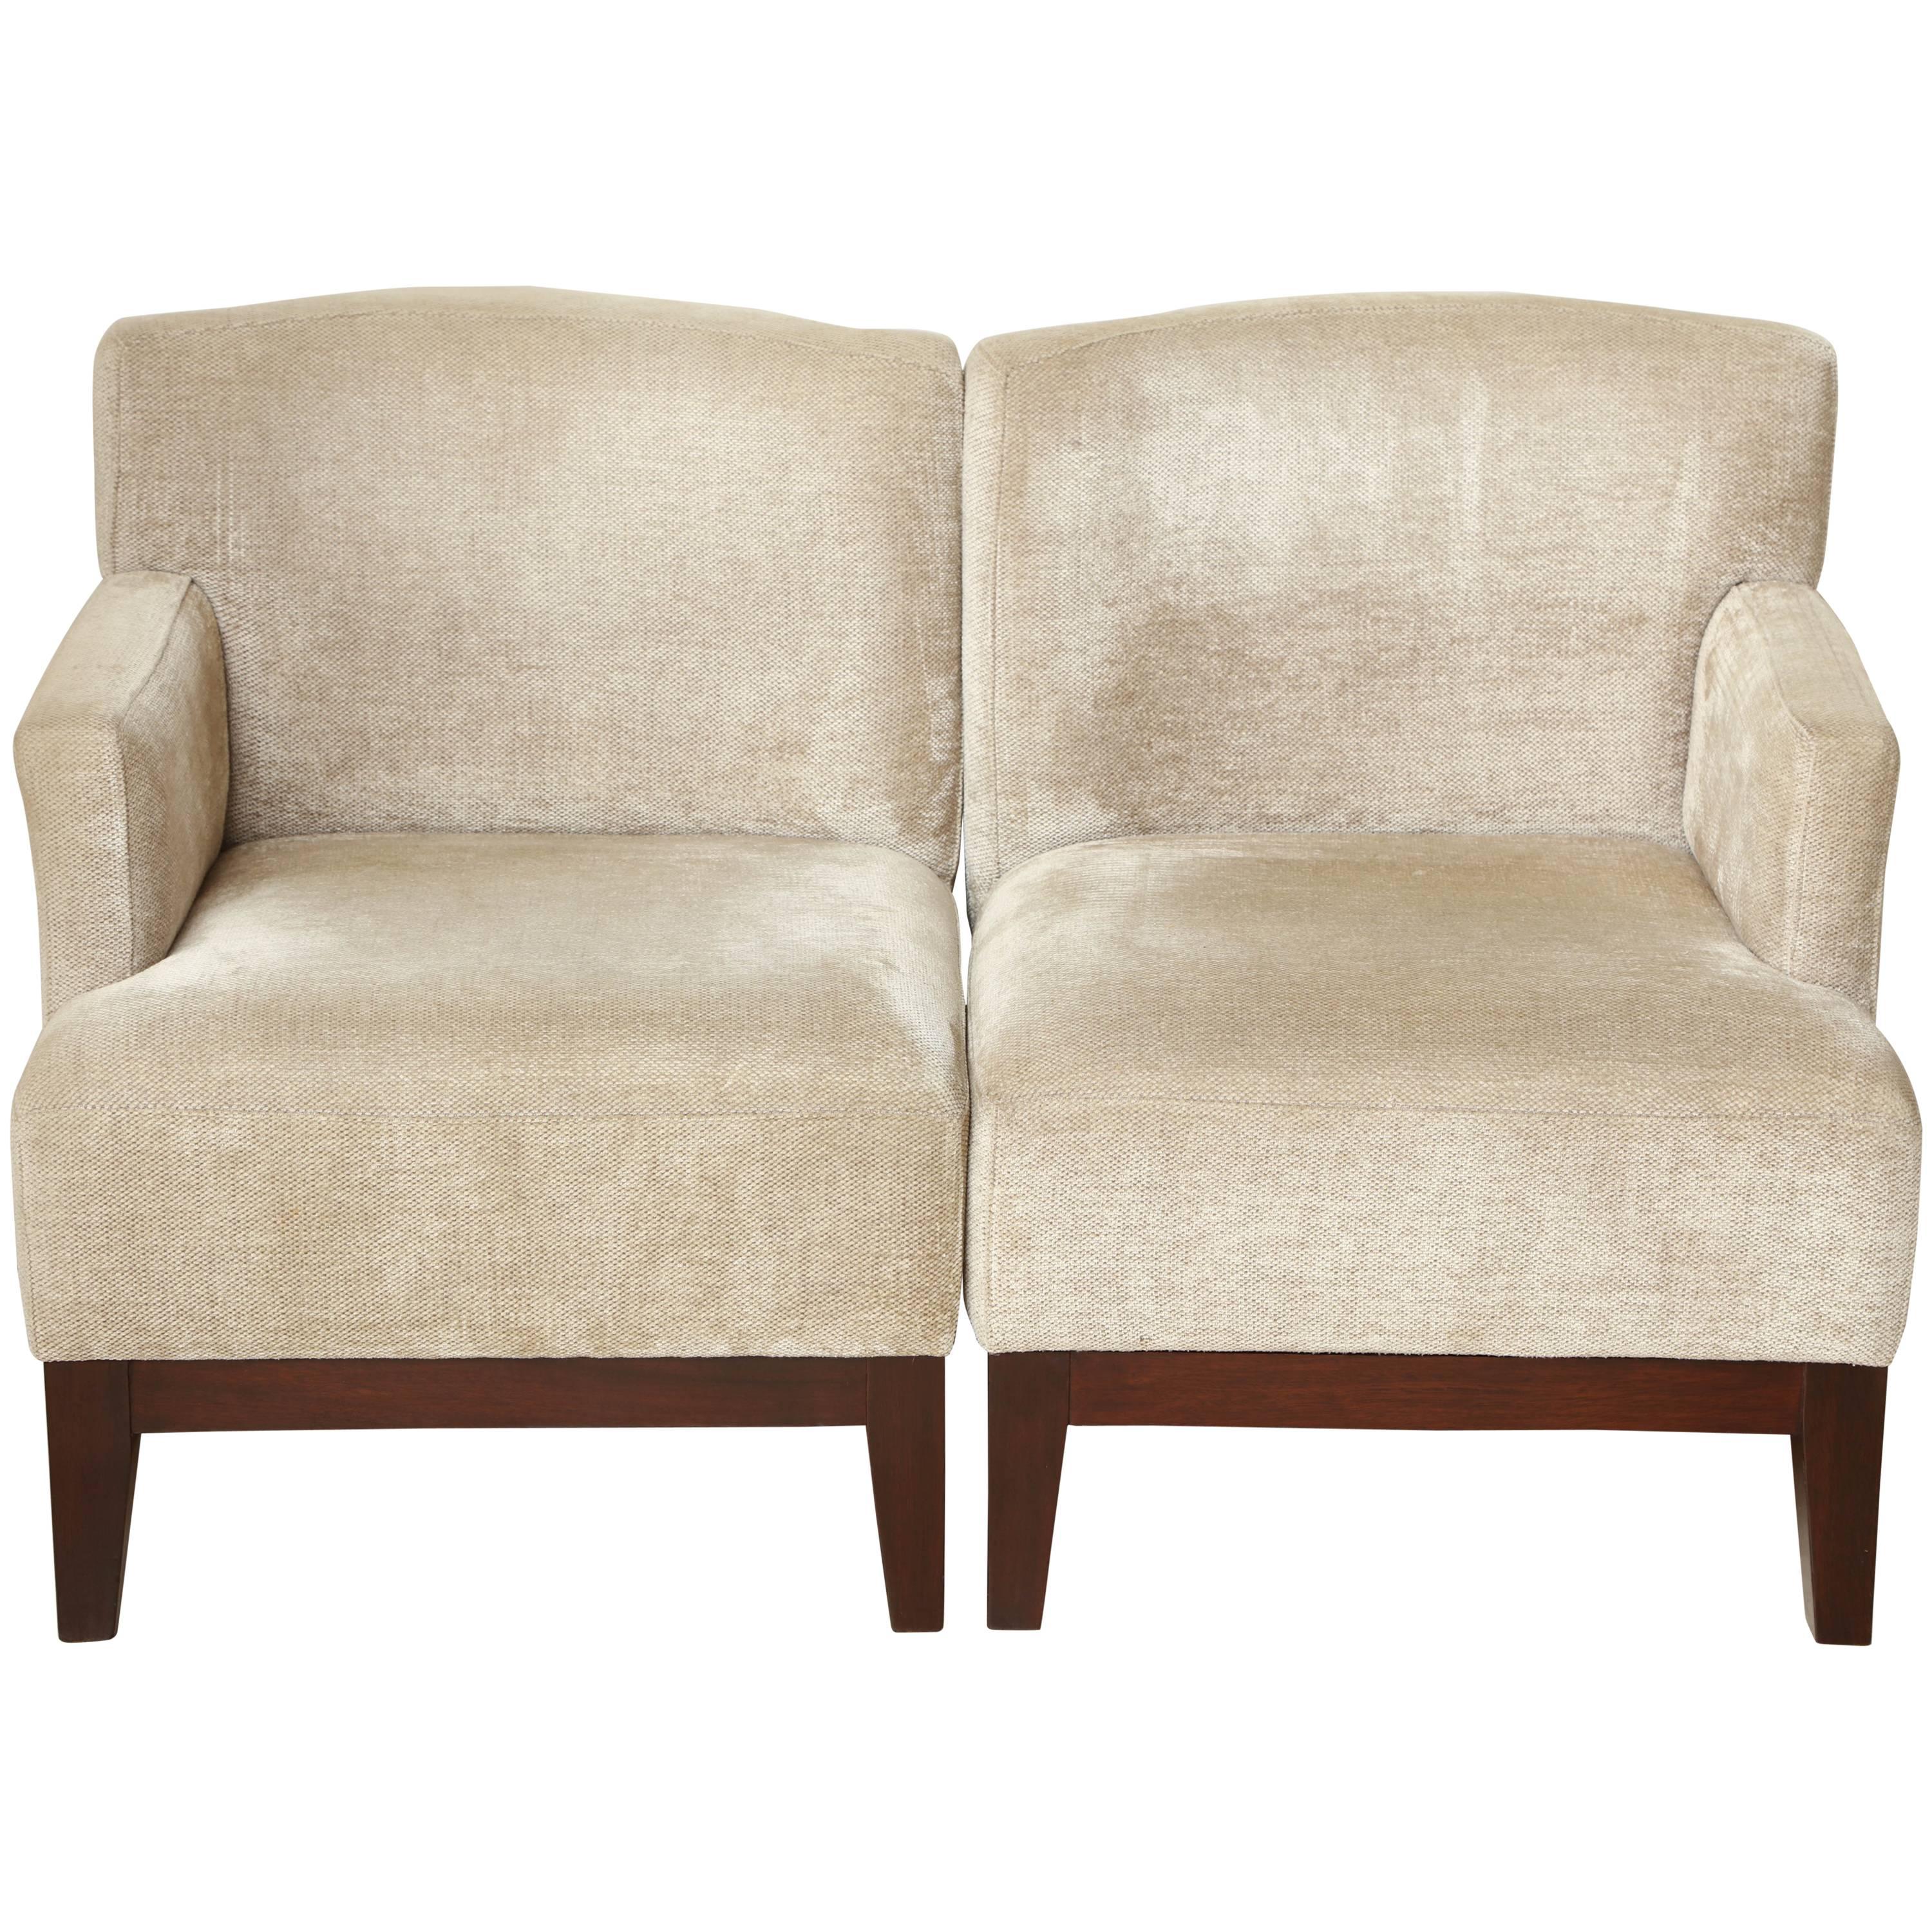 Pair of Modern Single Arm Wood and Upholstered Beige Chenille Chairs, Belgium For Sale